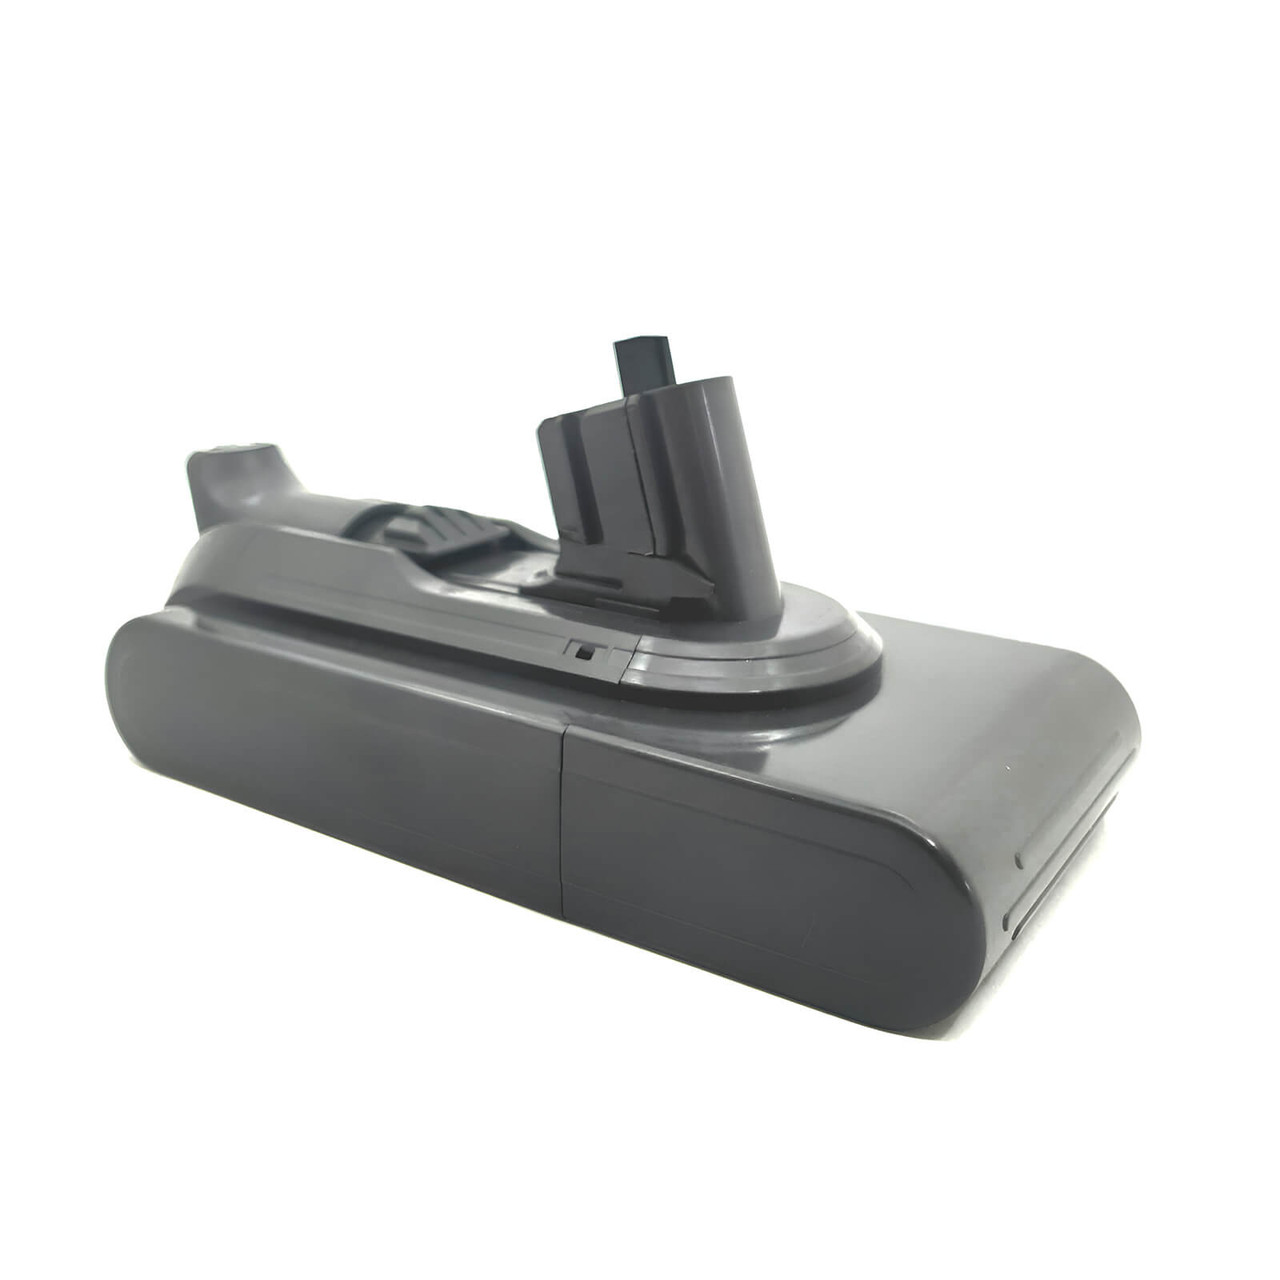 Replacement or additional click-in battery for your Dyson V11™ vacuum